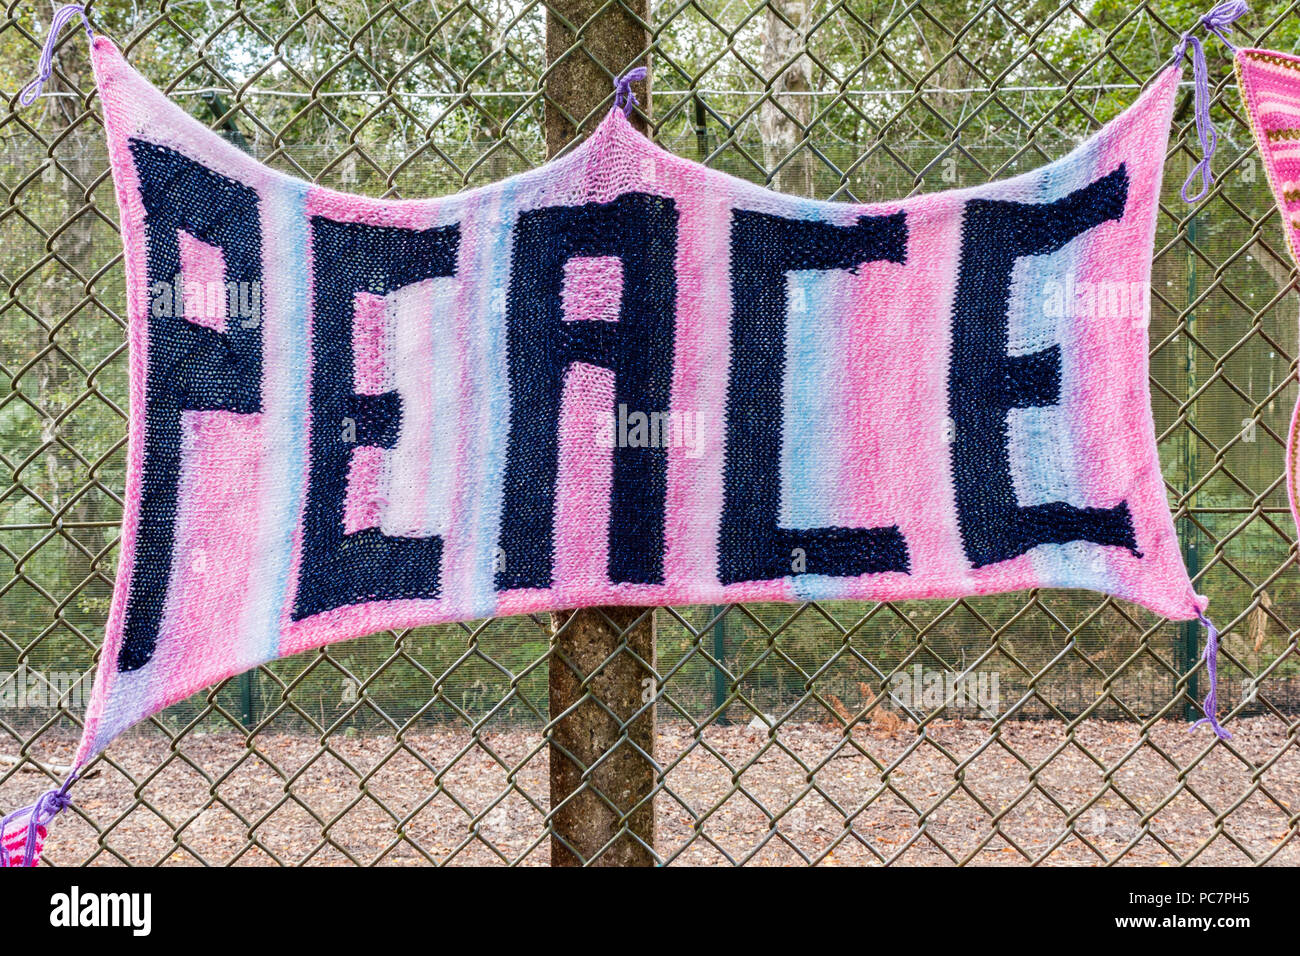 Knitted scarf with the word 'Peace' on it tied to a fence on the perimeter of the Atomic Weapons Establishment at Aldermaston, Berkshire, England, GB. Stock Photo